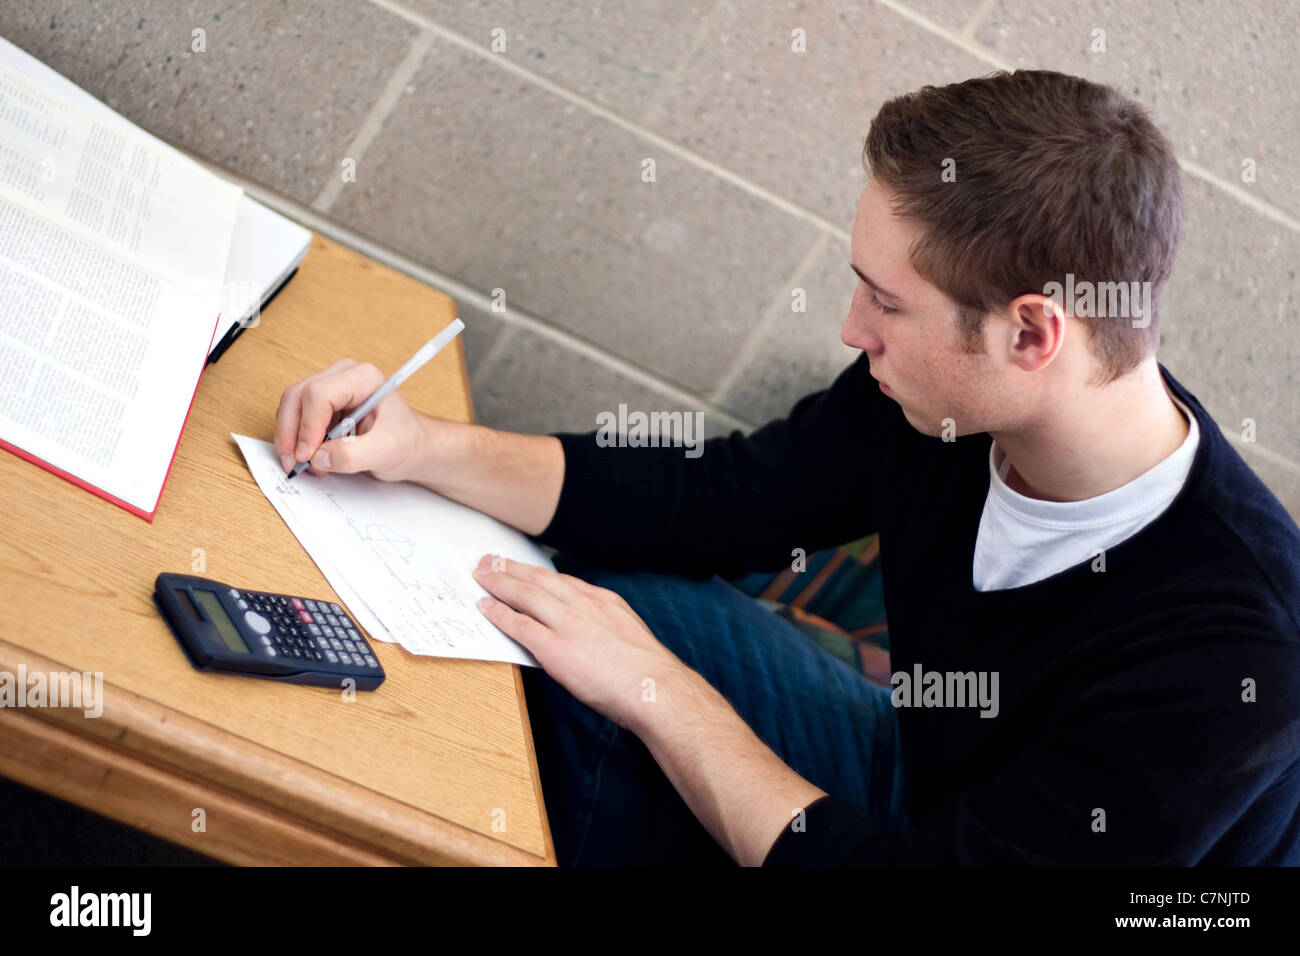 A young high school or college student working on his math homework. Stock Photo